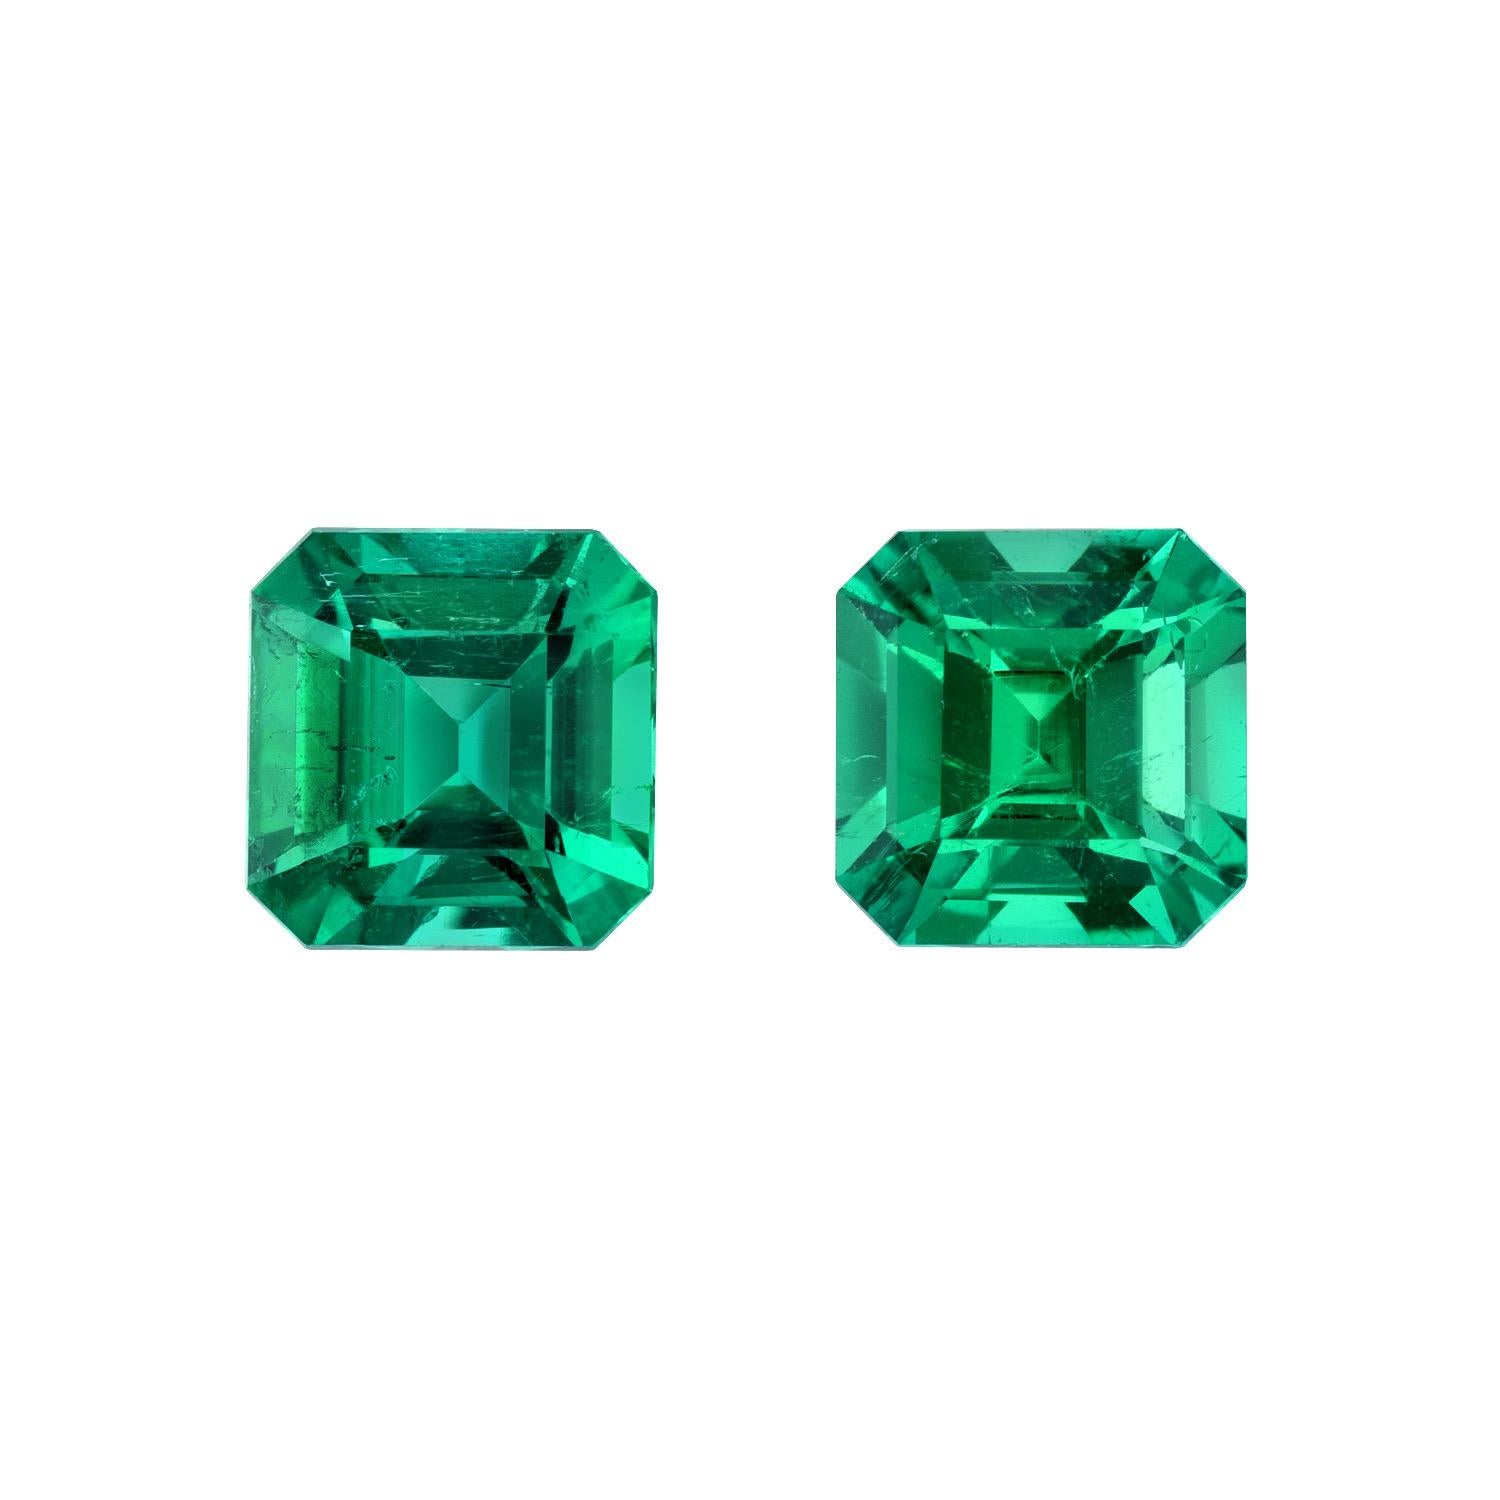 Contemporary Colombian Emerald Earrings Pair 2.95 Carats Octagon Loose Gemstones